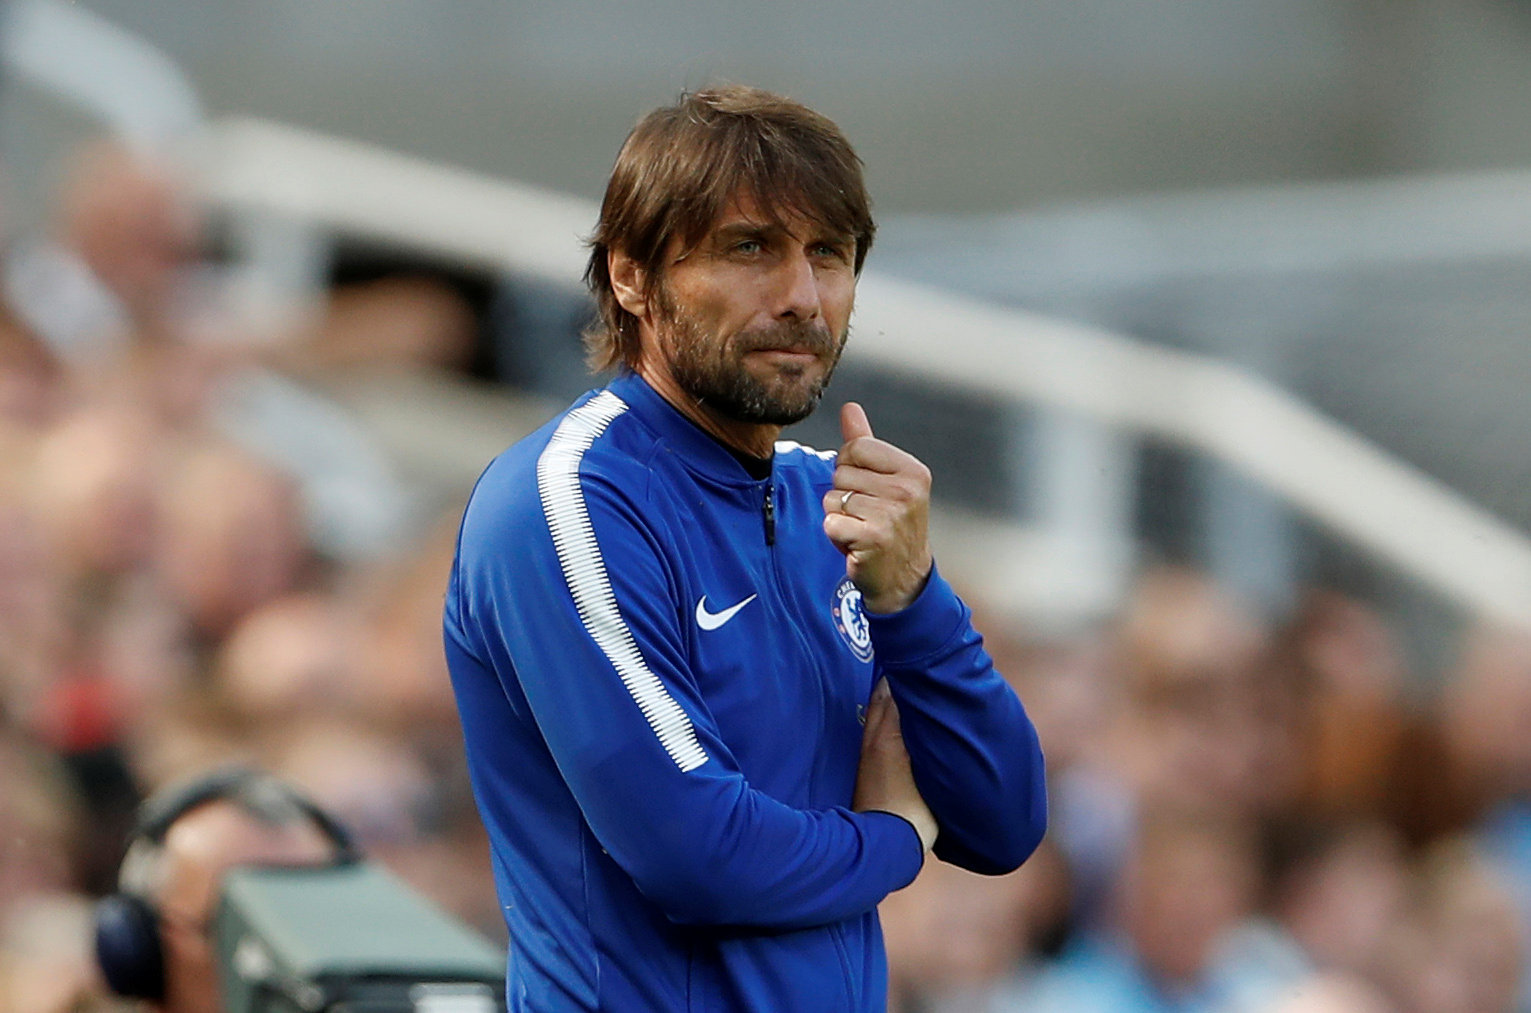 Antonio Conte looks to give Chelsea a trophy on way out - The